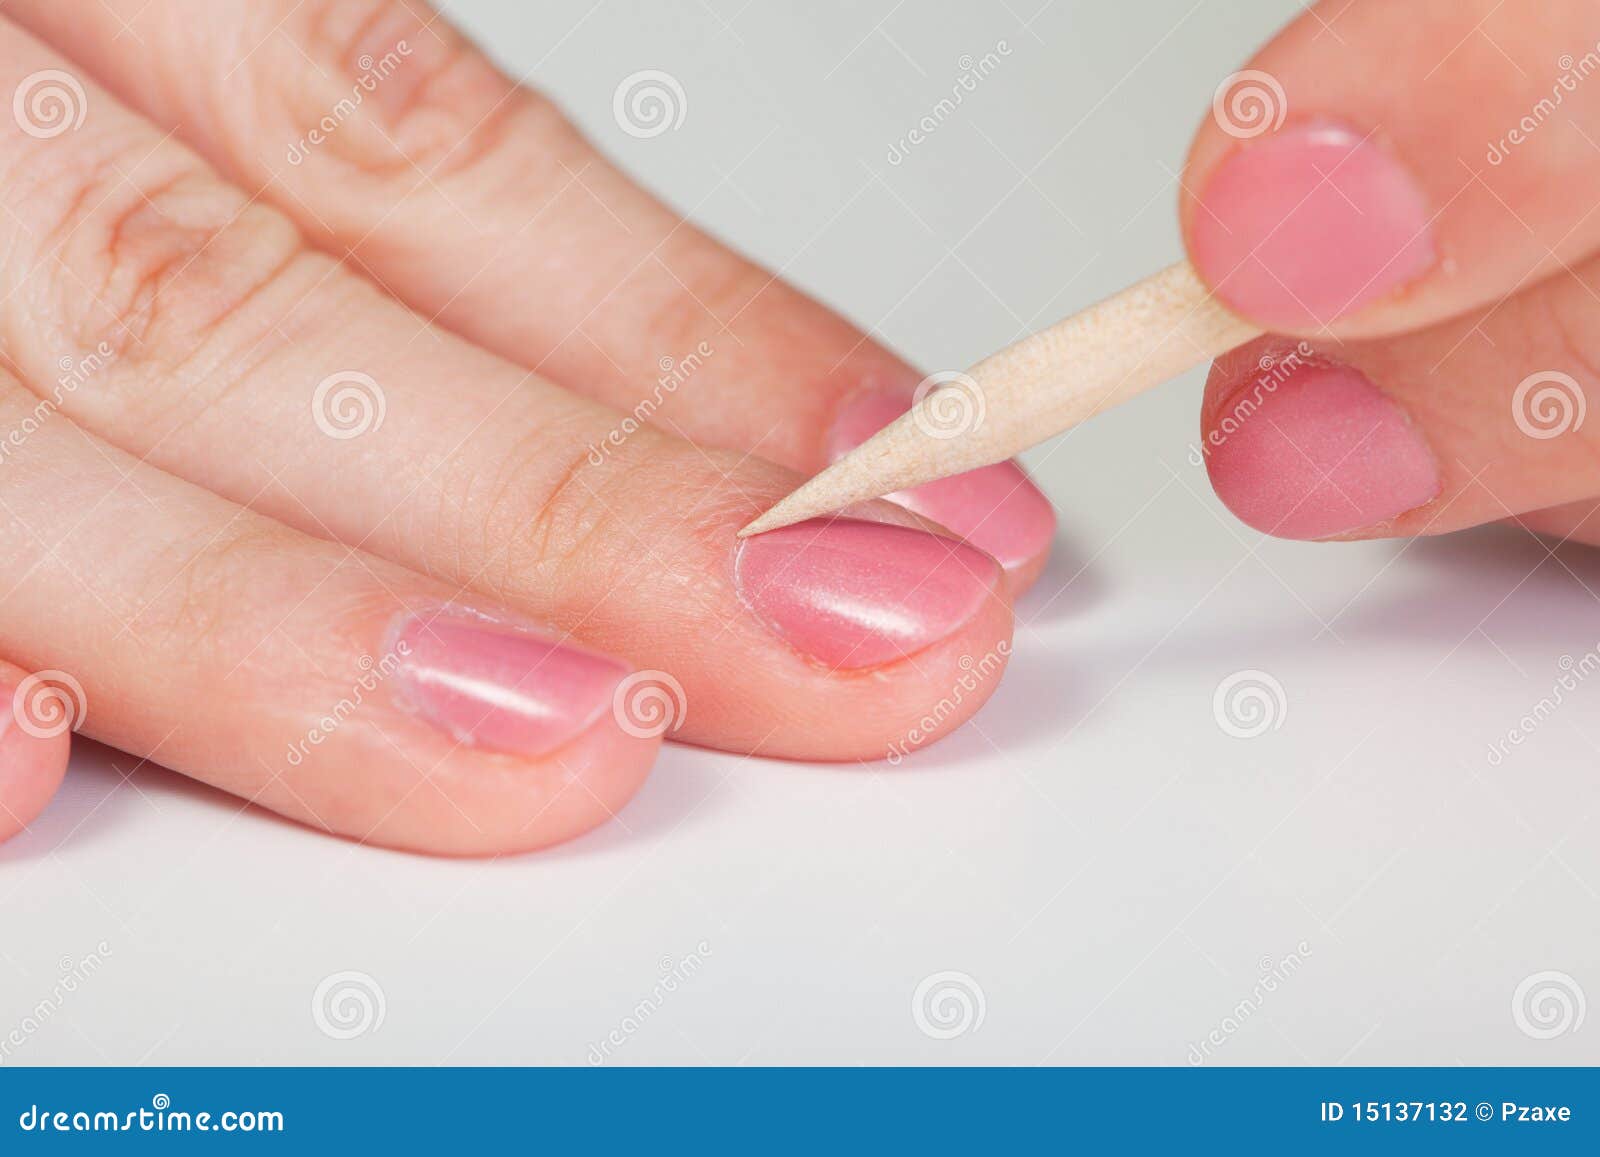 procedure for nail care - cuticle removal